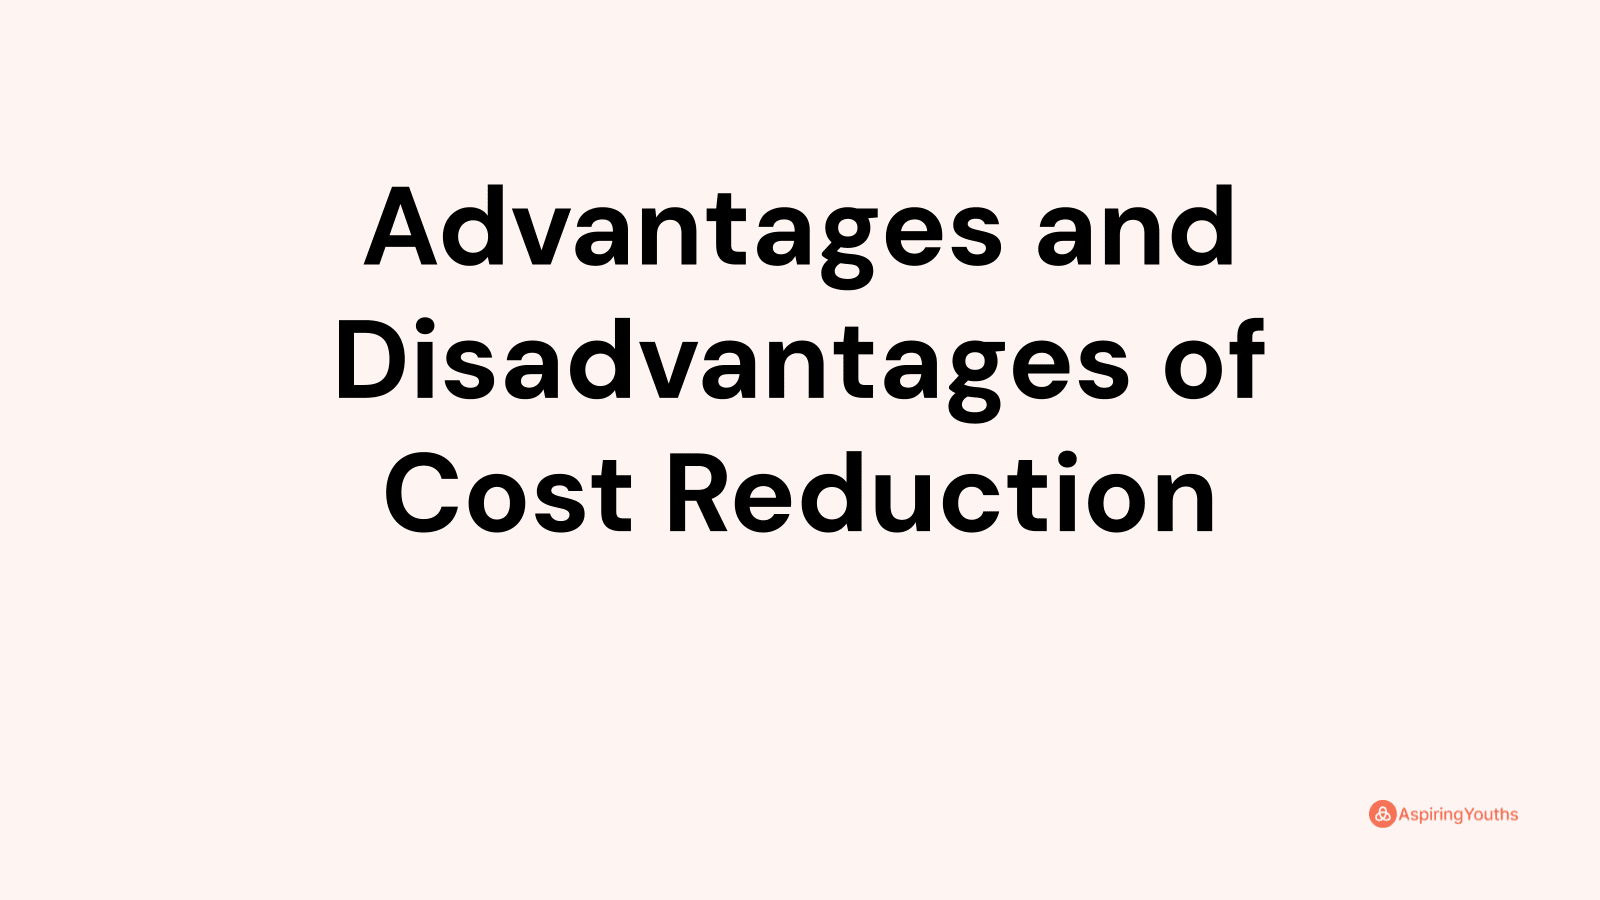 Advantages and disadvantages of Cost Reduction